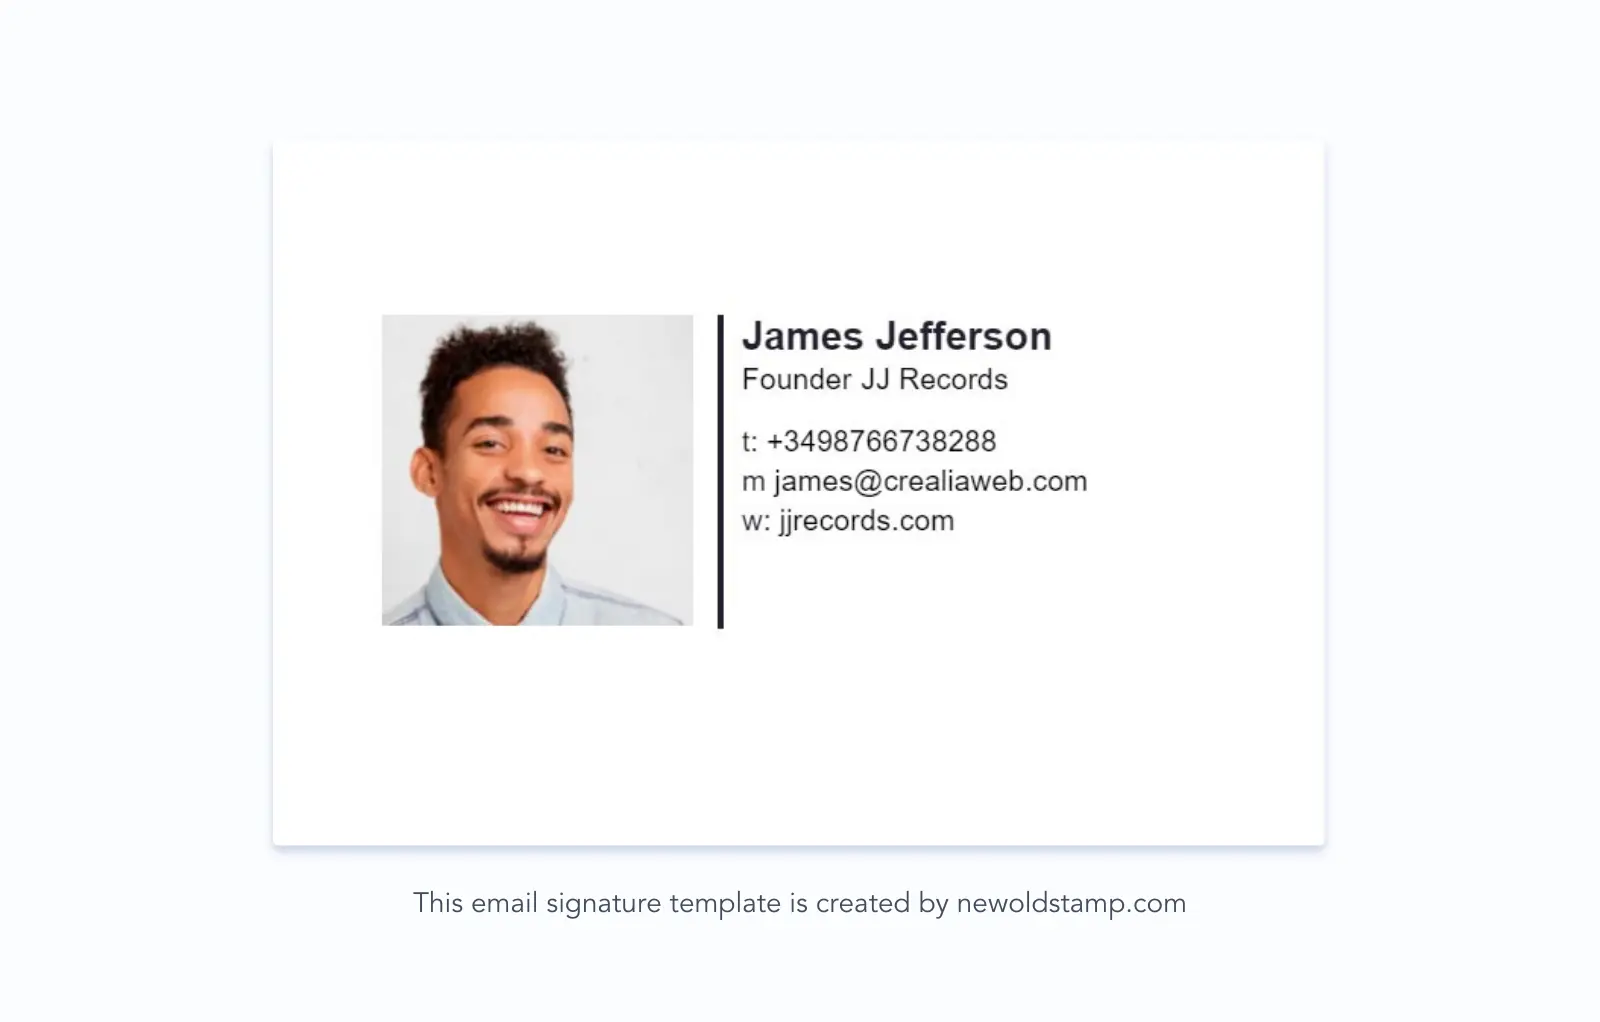 Simple email signature without social media icons